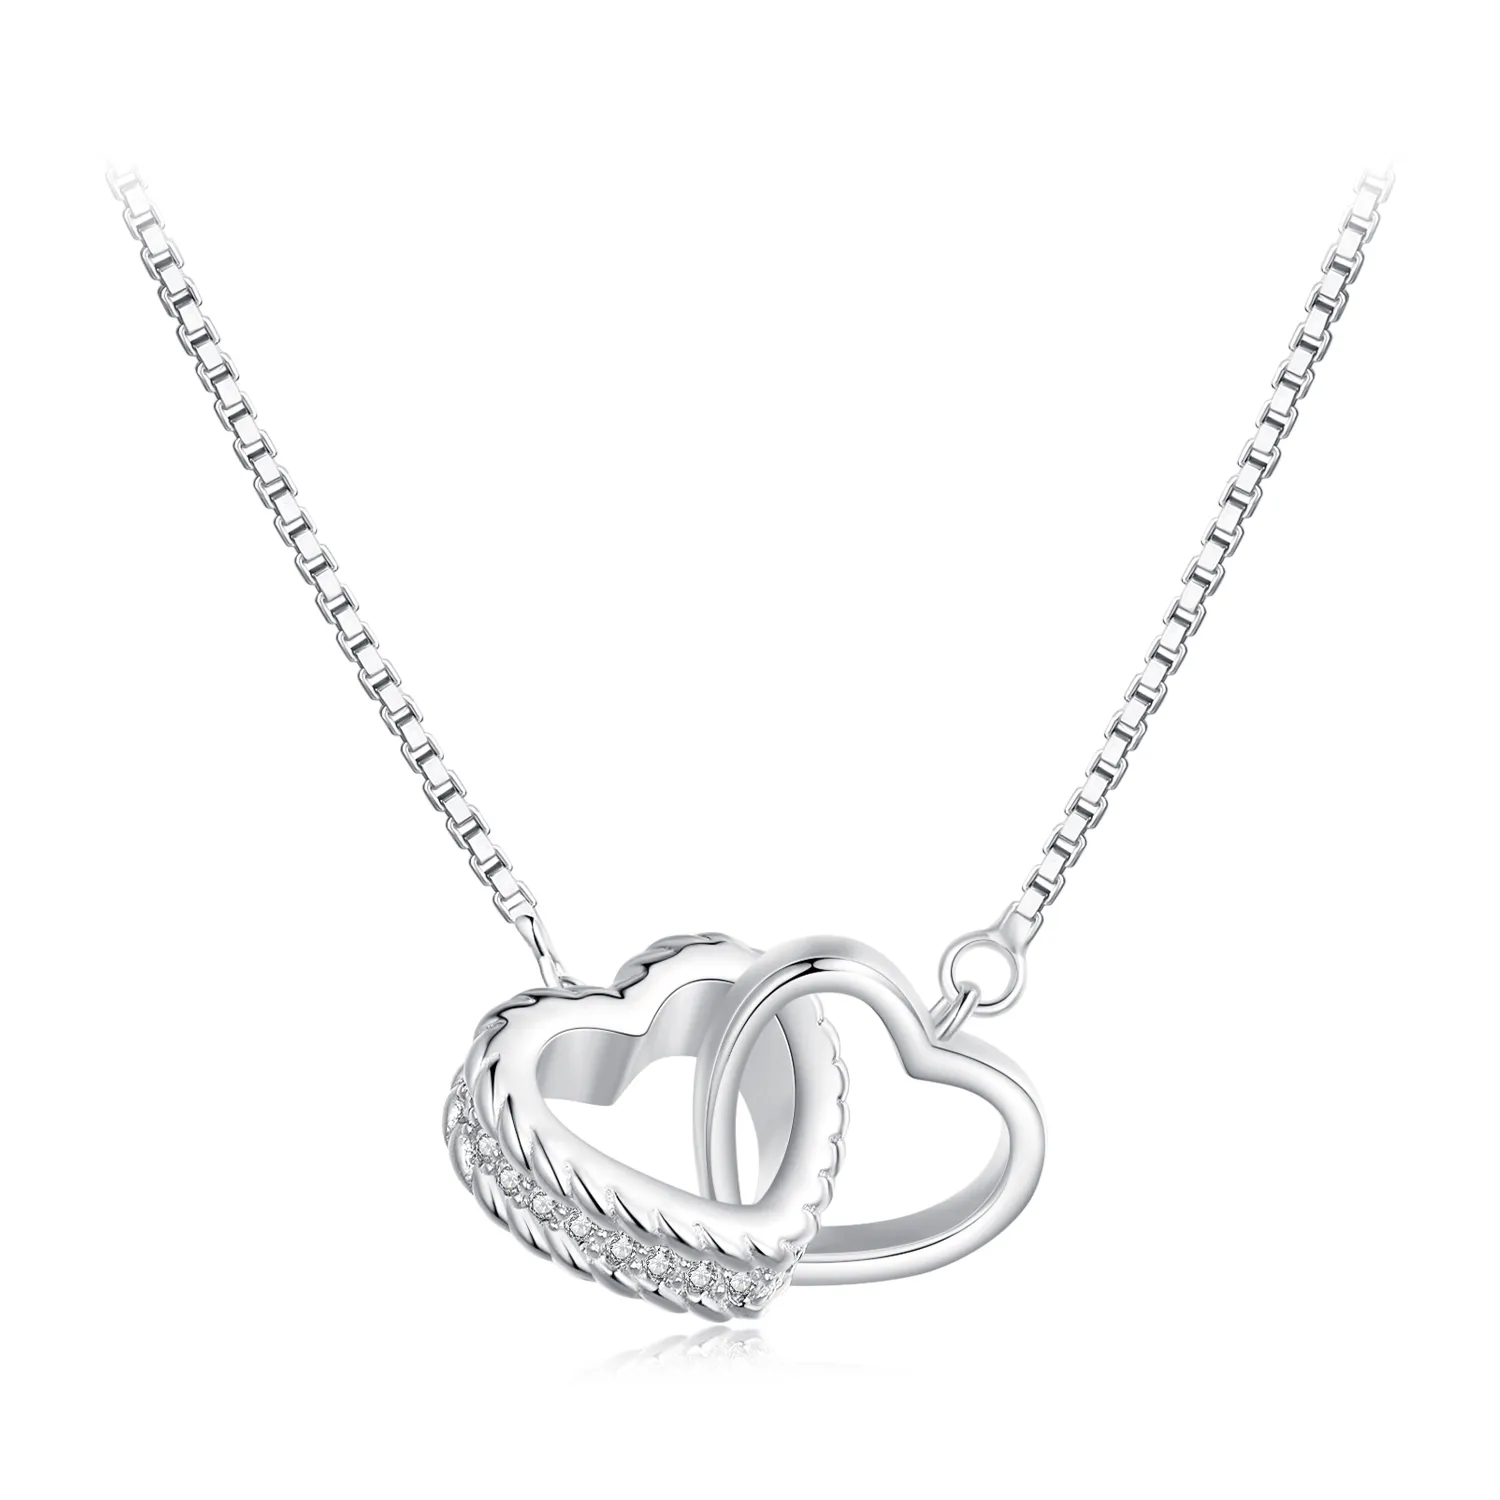 Entwined Necklace Pandora Style - BSN339